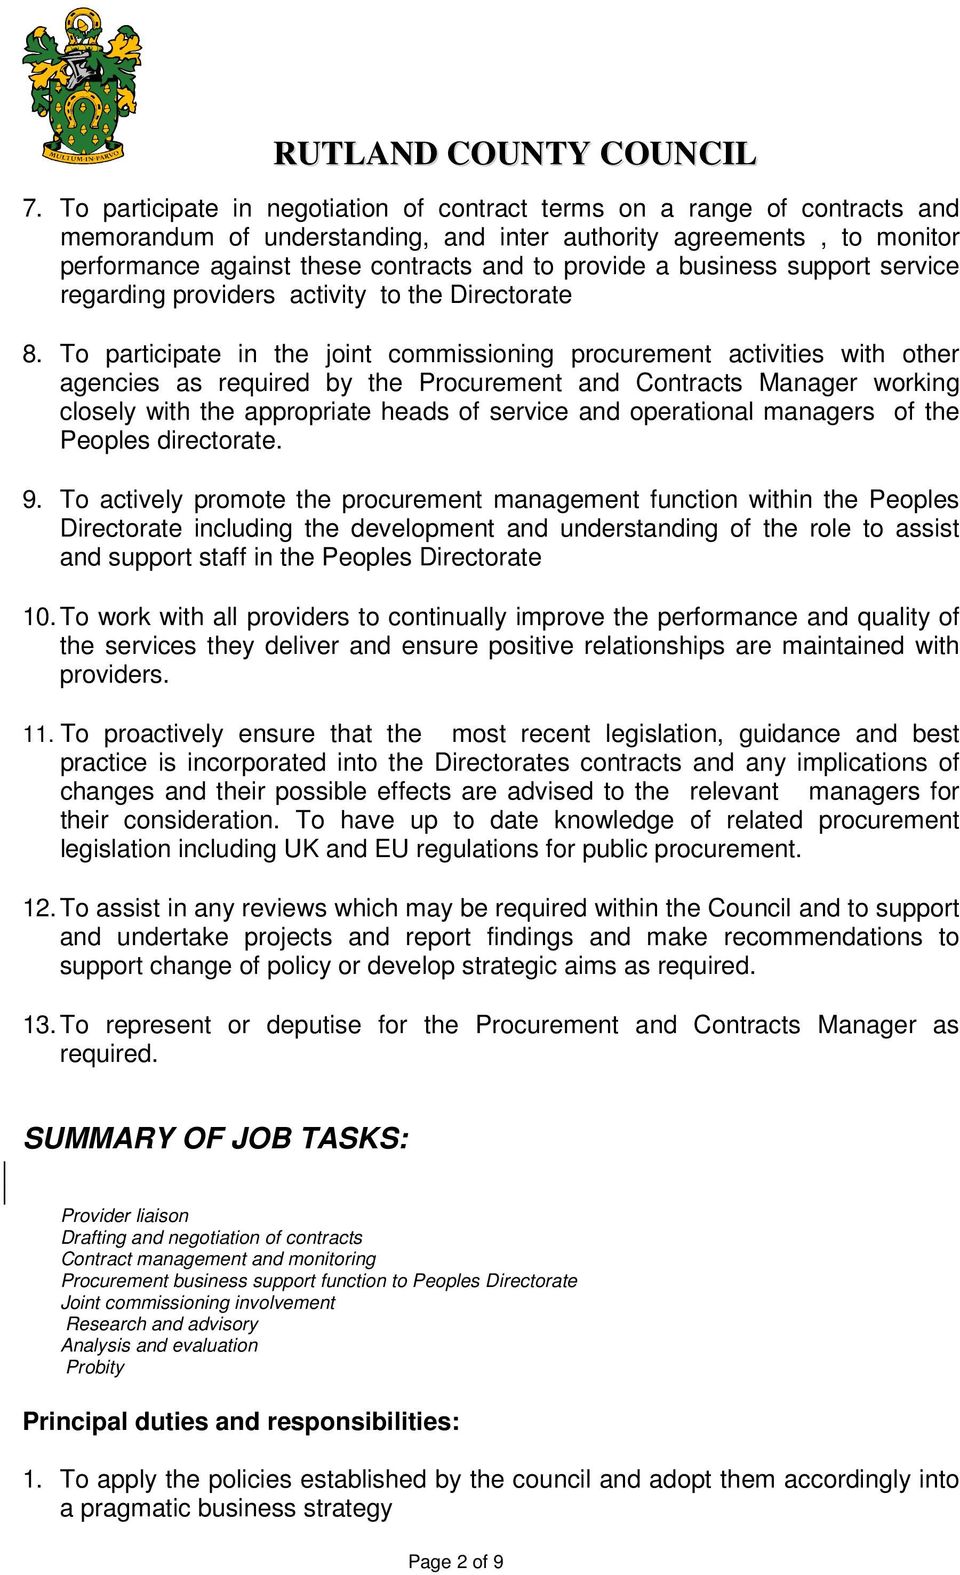 To participate in the joint commissioning procurement activities with other agencies as required by the Procurement and Contracts Manager working closely with the appropriate heads of service and